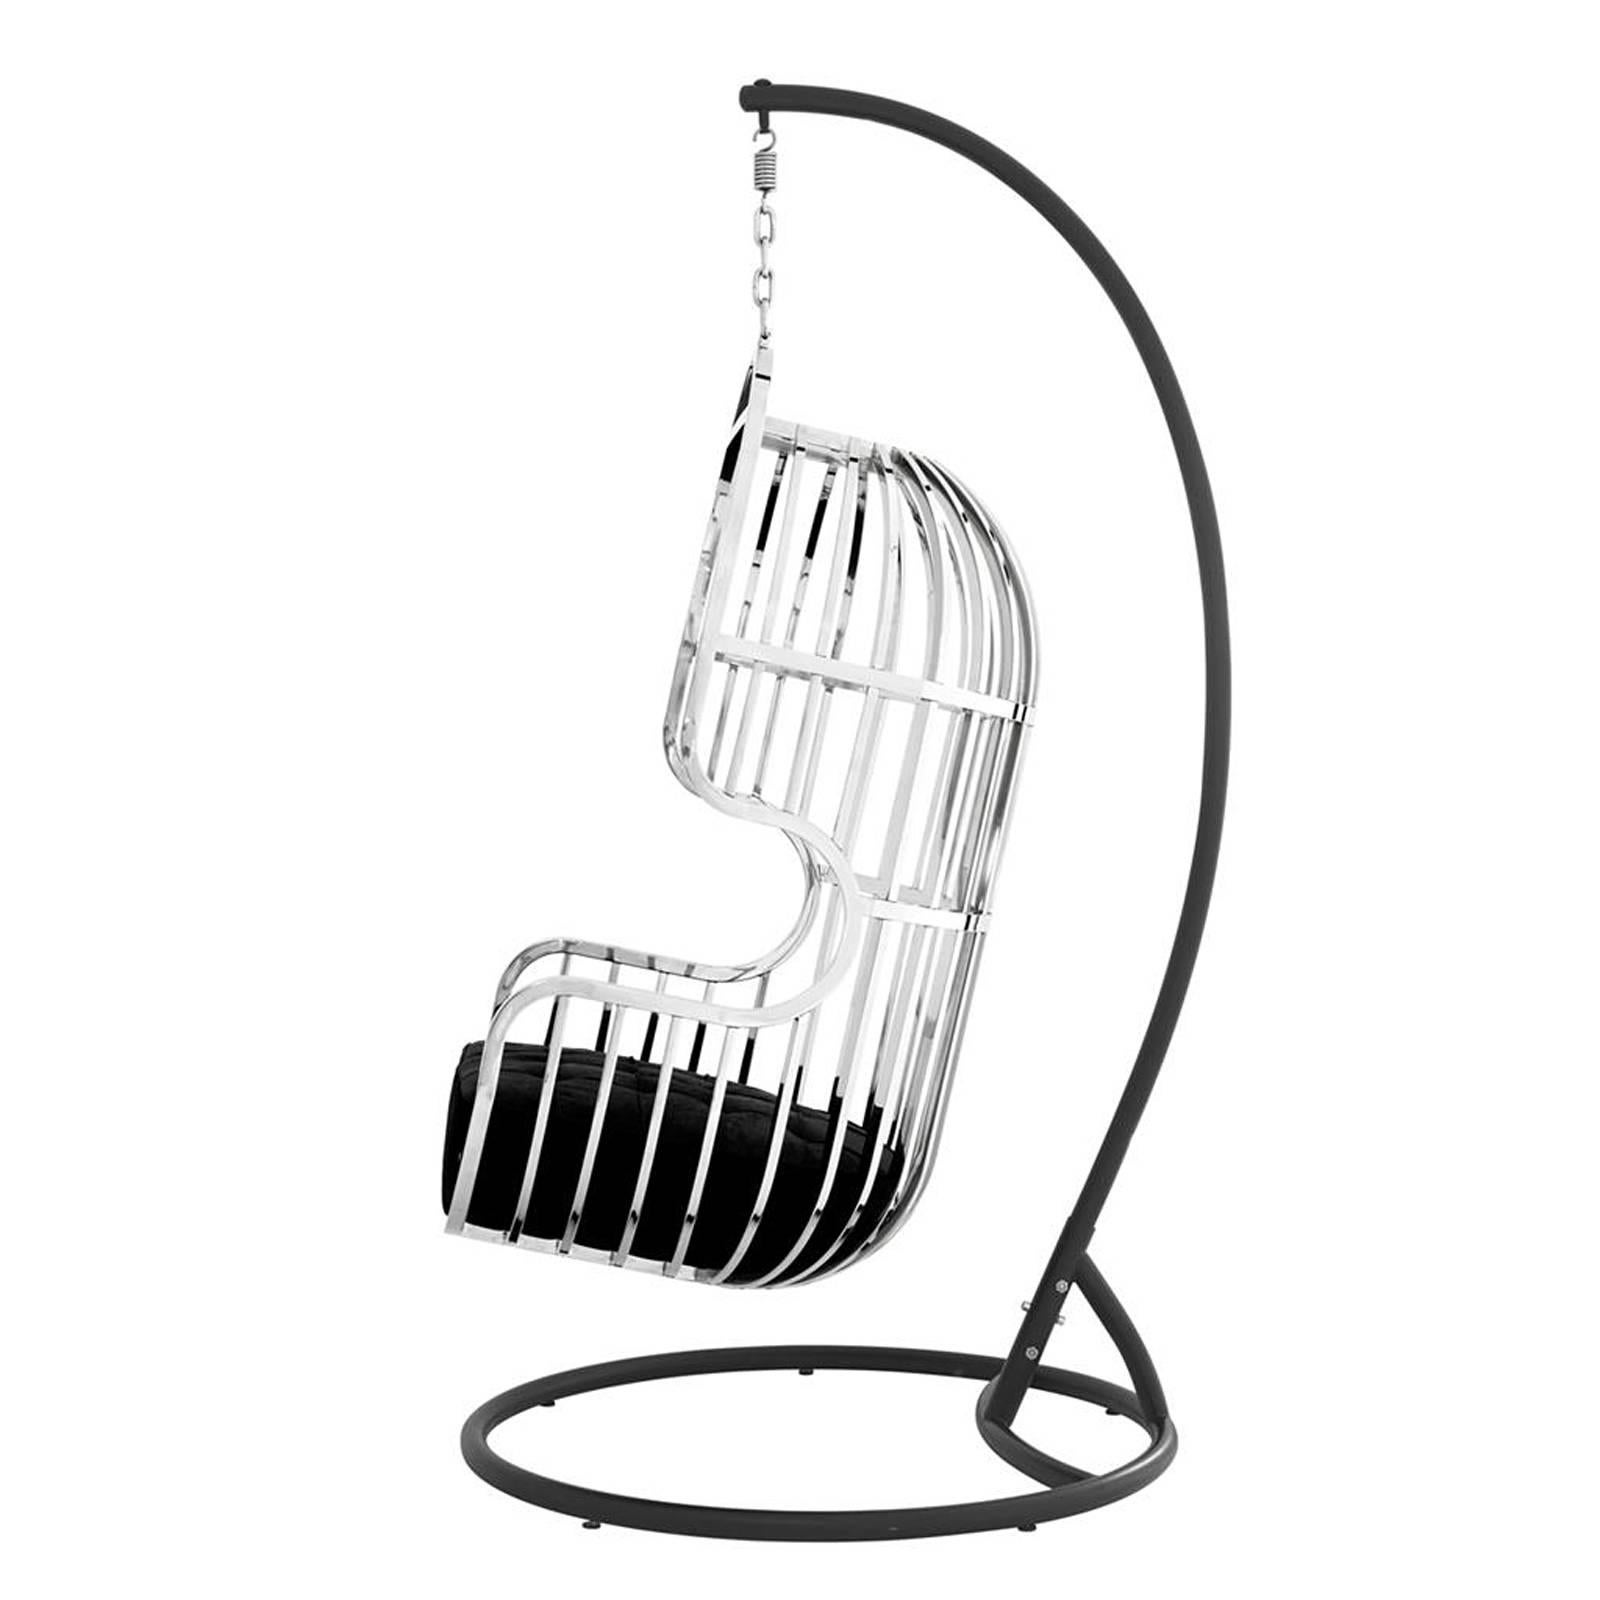 Chinese Cage Swivel Armchair in Polished Stainless Steel